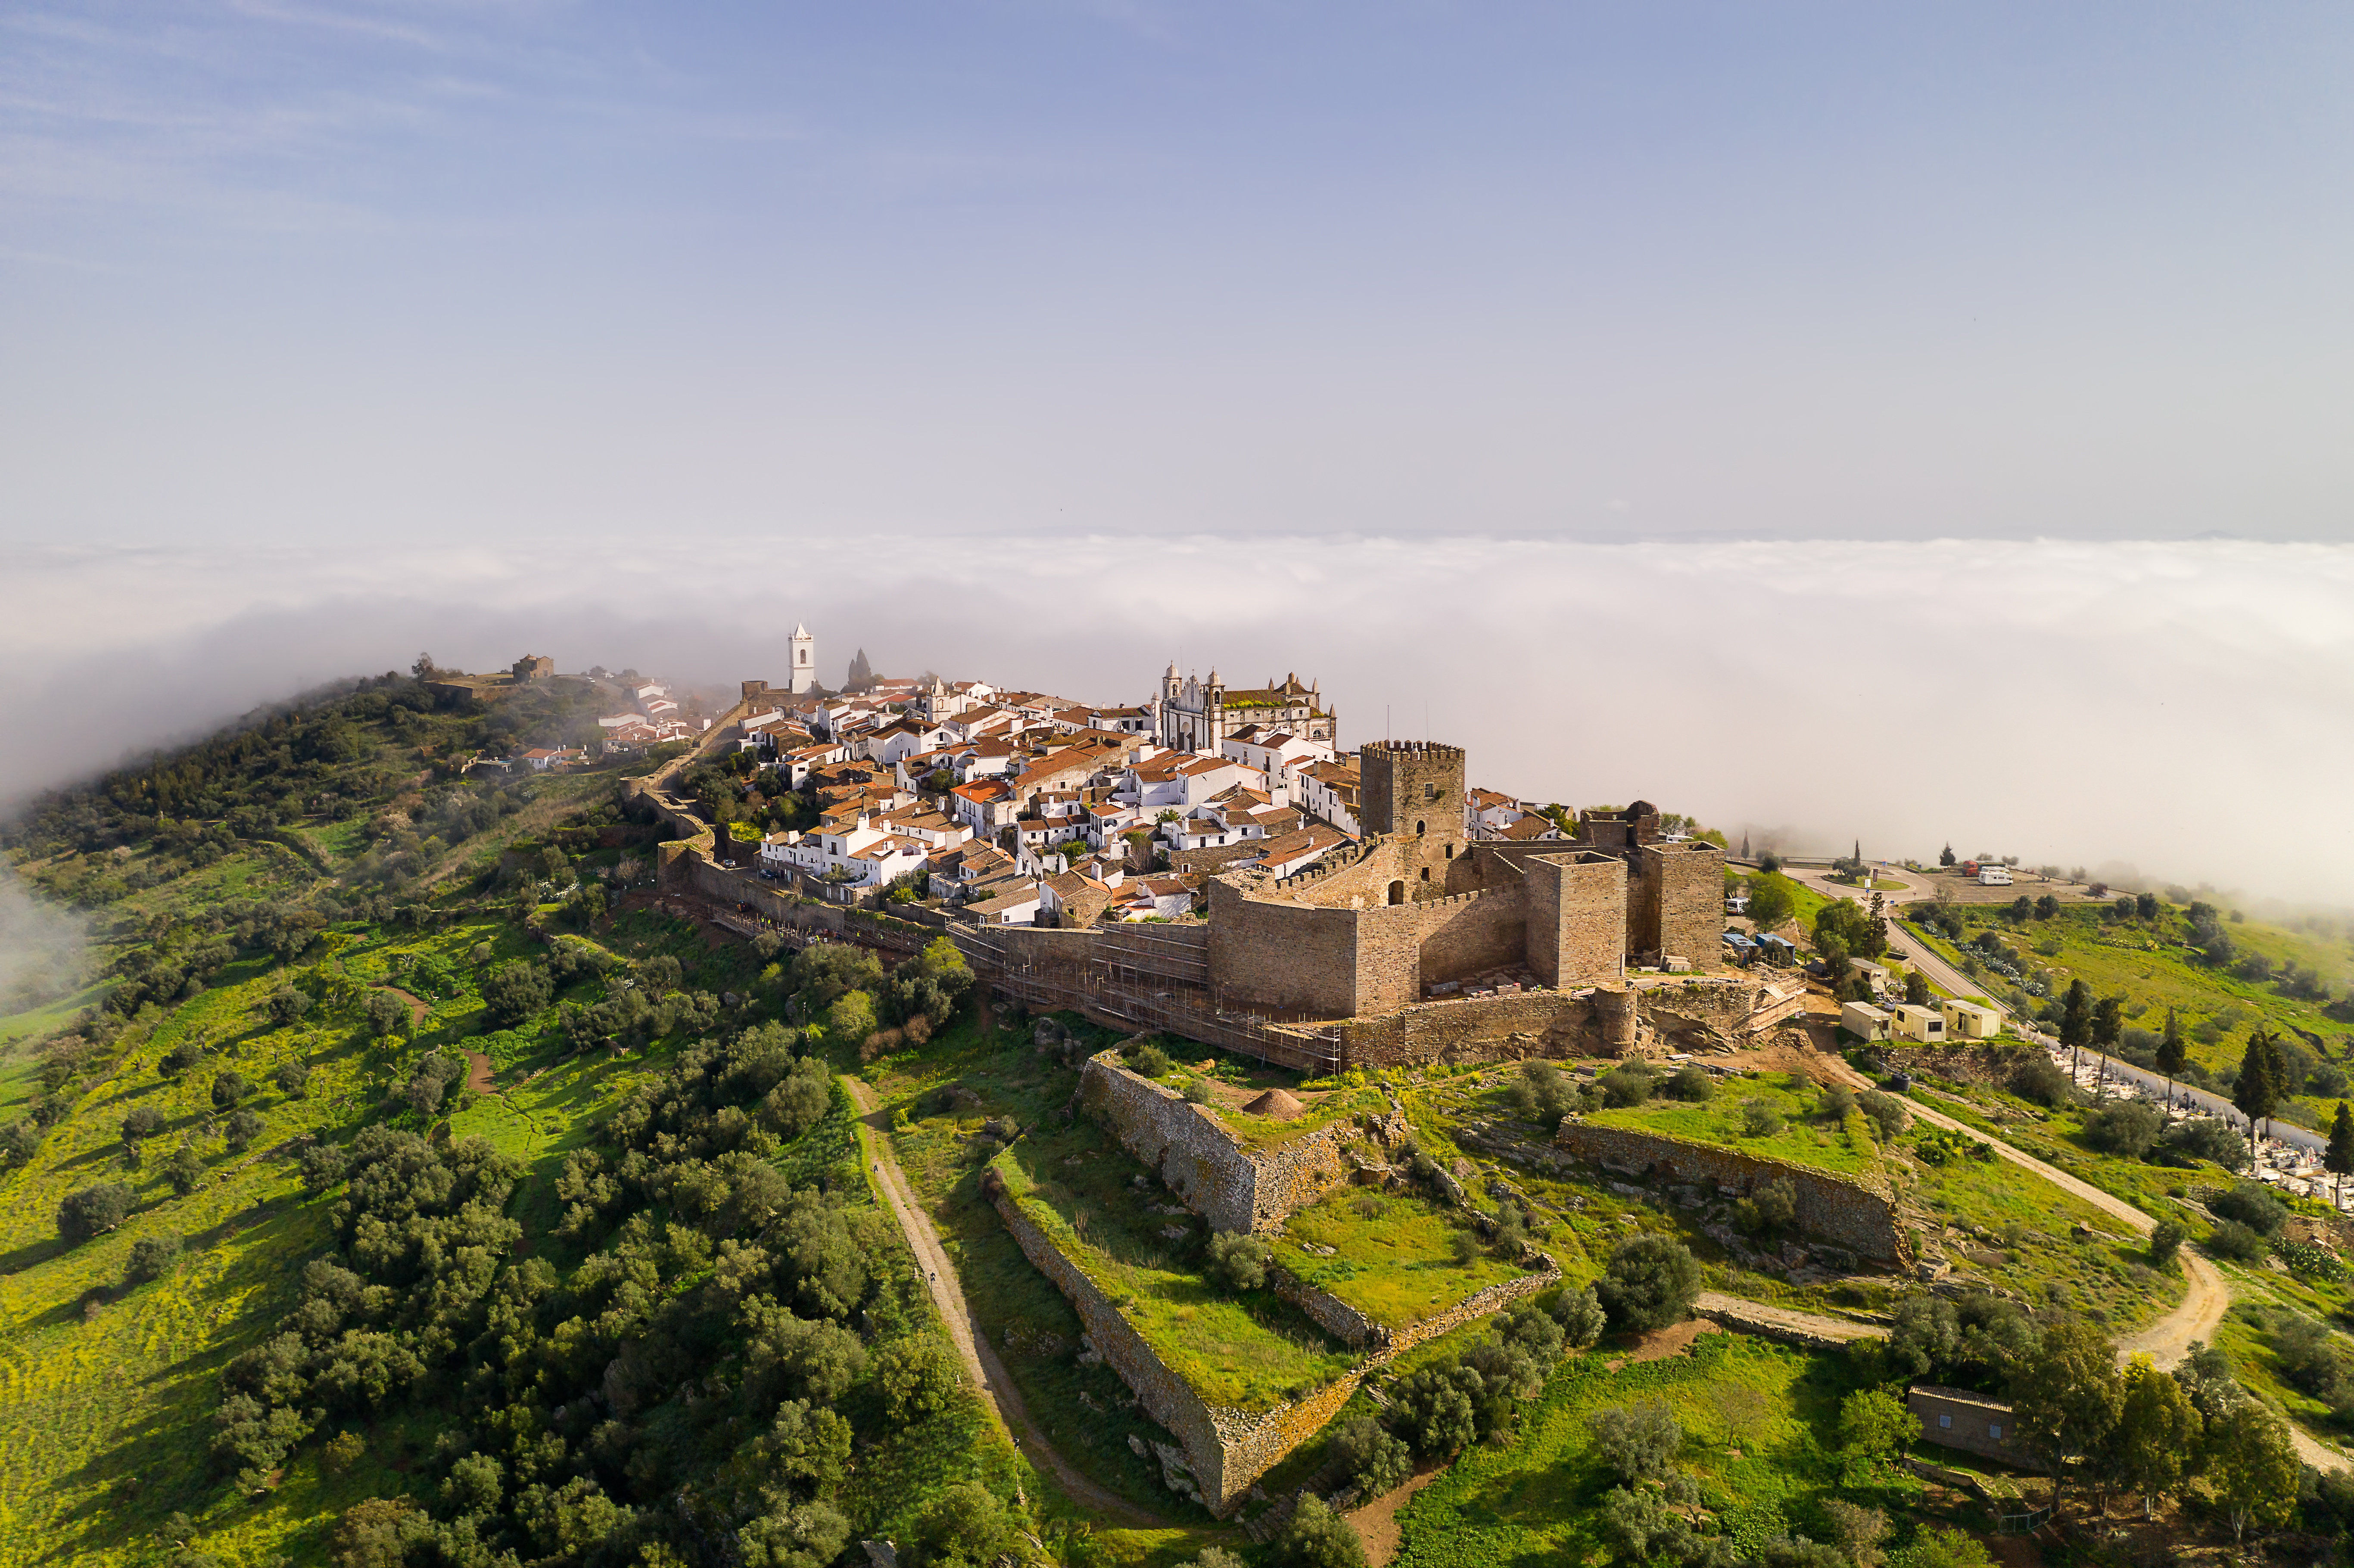 A castle and town in Portugal